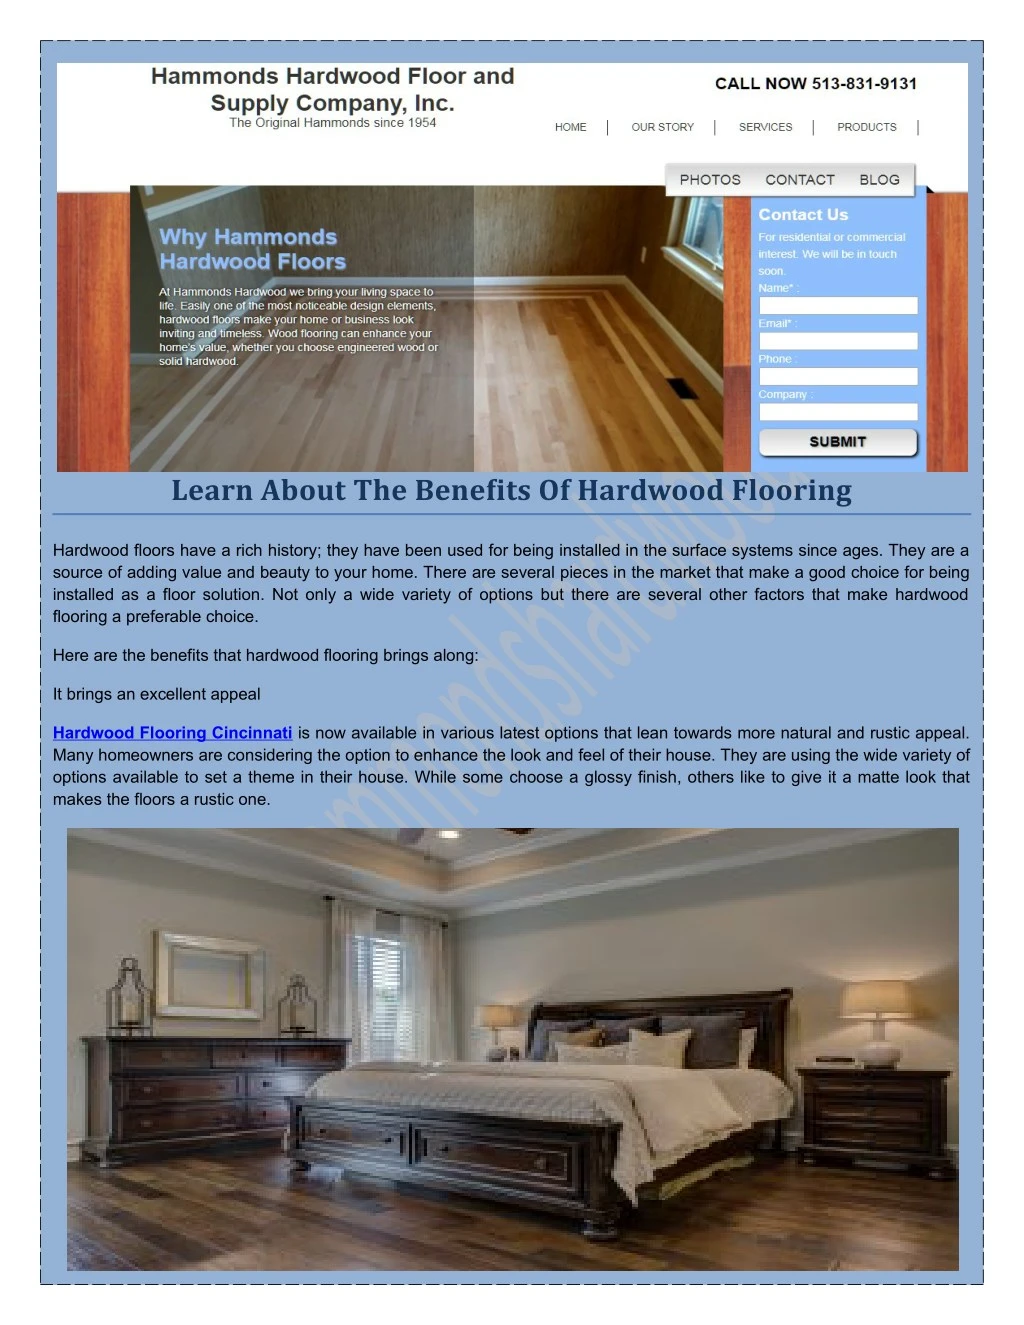 learn about the benefits of hardwood flooring n.